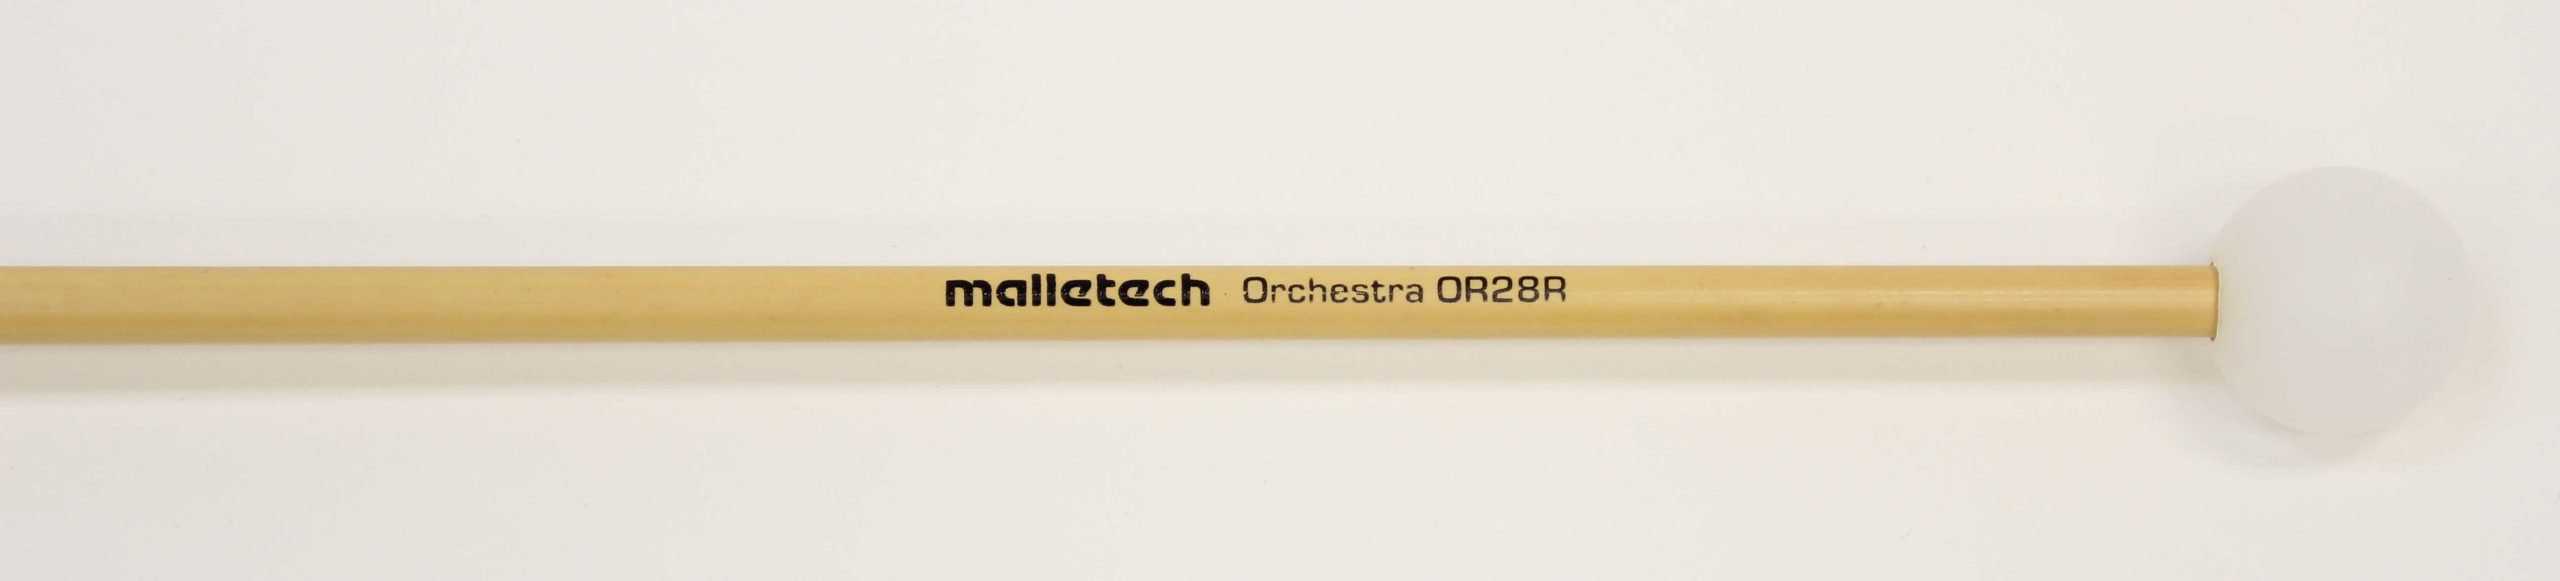 Malletech OR28R Orchestral Series Xylophone Mallets